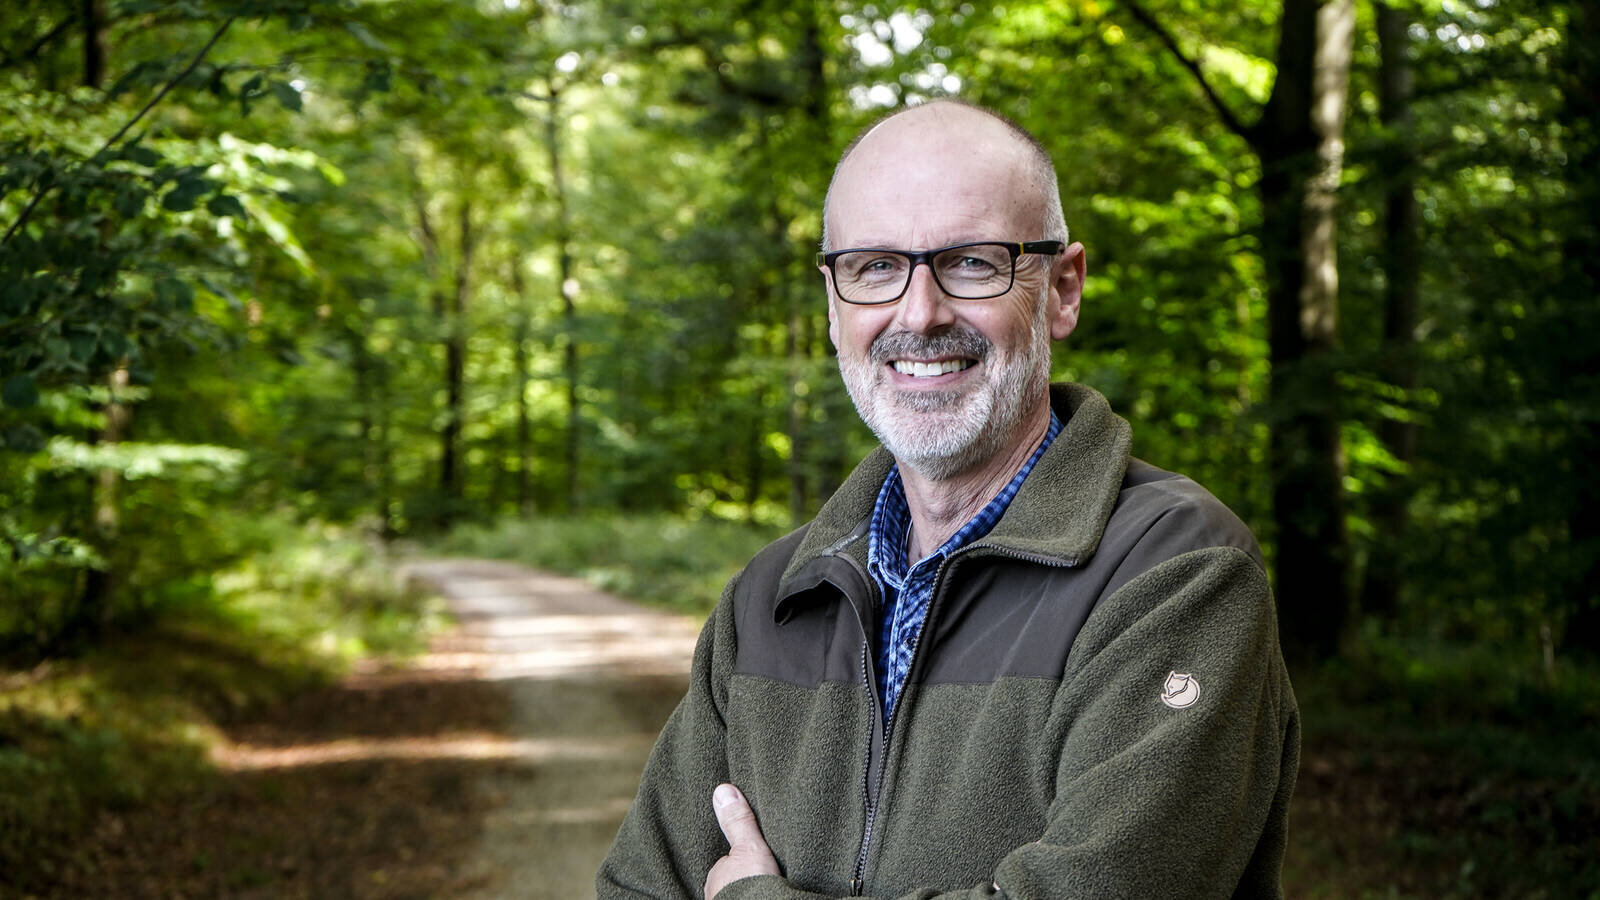 PICTURED: The Ent, forester, author, academic, and now-focus of the new Documentary, “The Hidden Lives of Trees,” Peter Wohlleben.